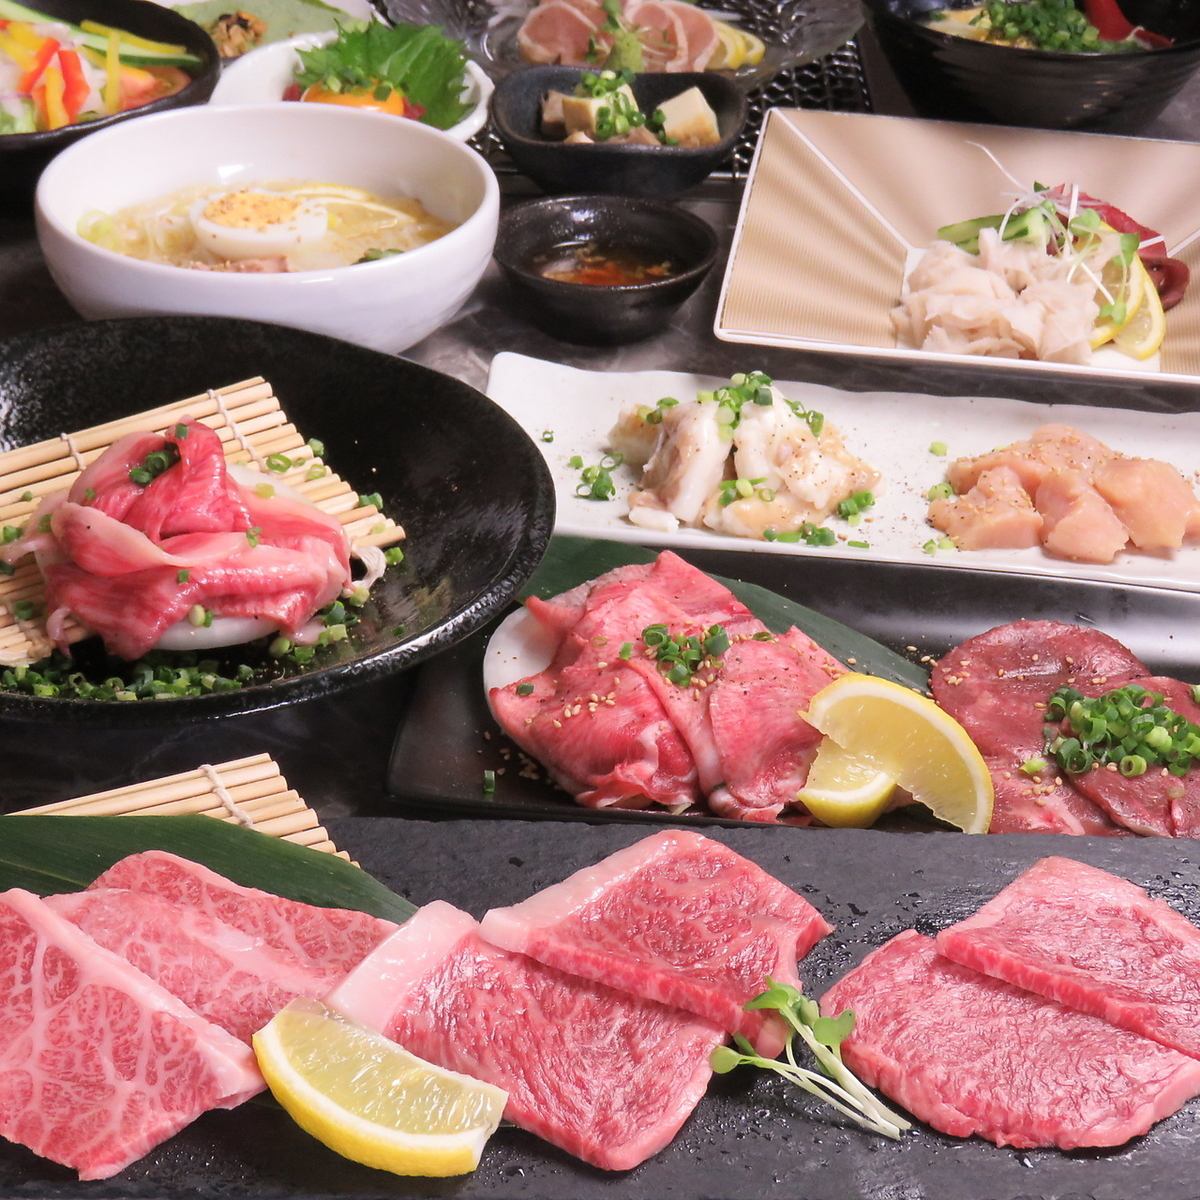 The supreme charcoal-grilled meat that has been grilled to the highest degree is "Yasu"! The genuine taste of Wagyu beef is here!